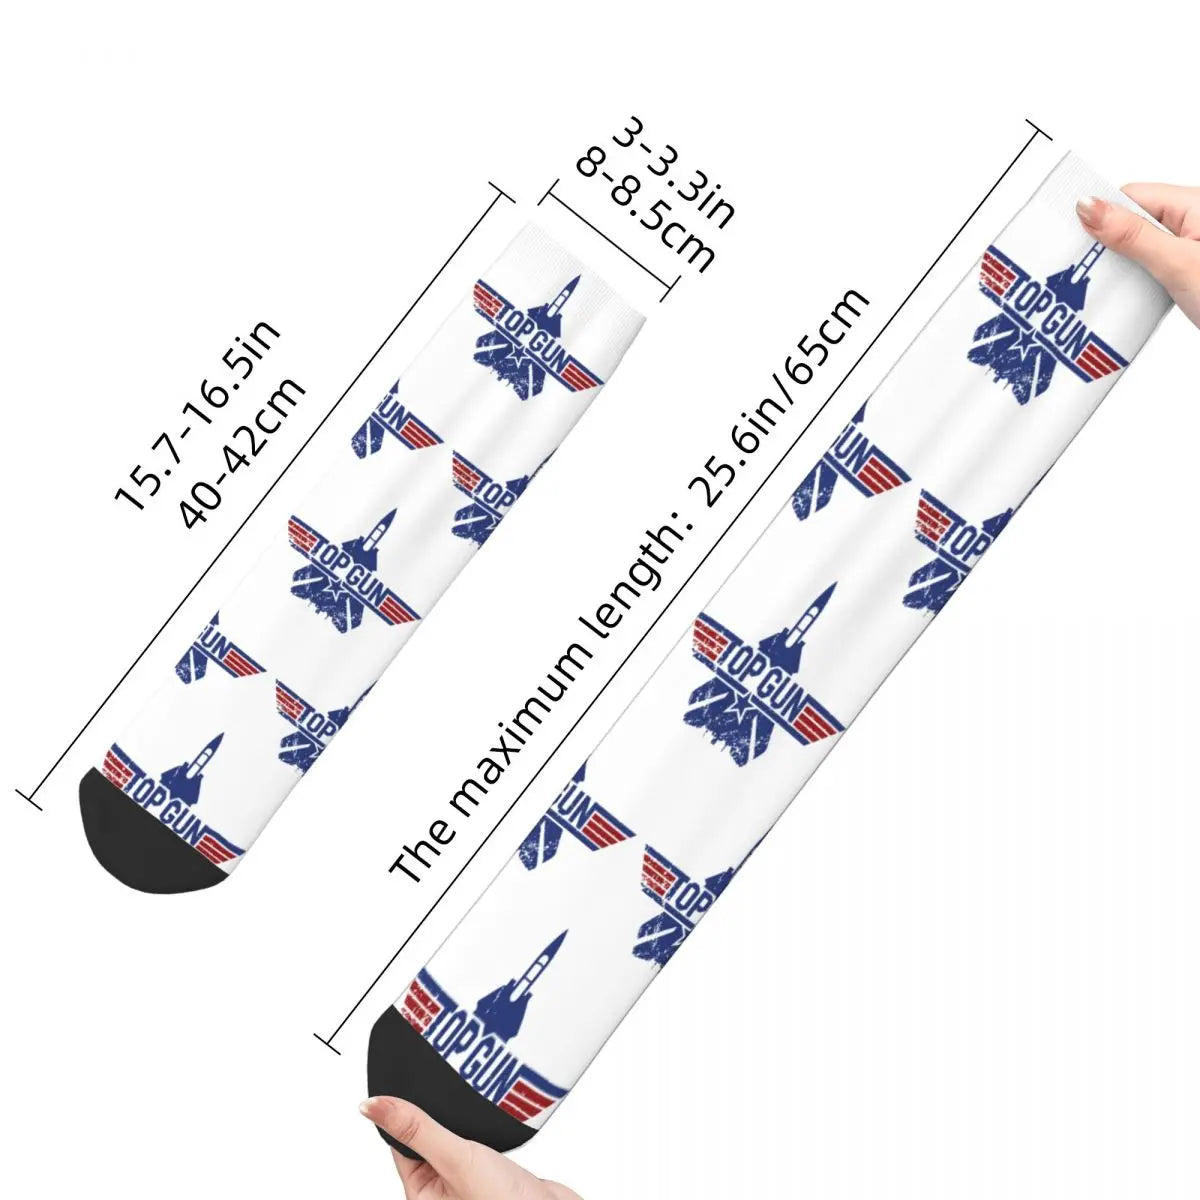 Top Gun Classic Polyester Socks - New Male & Women's Crazy Design - 80s Movies Skateboard for All Seasons-as the picture shown-One Size-